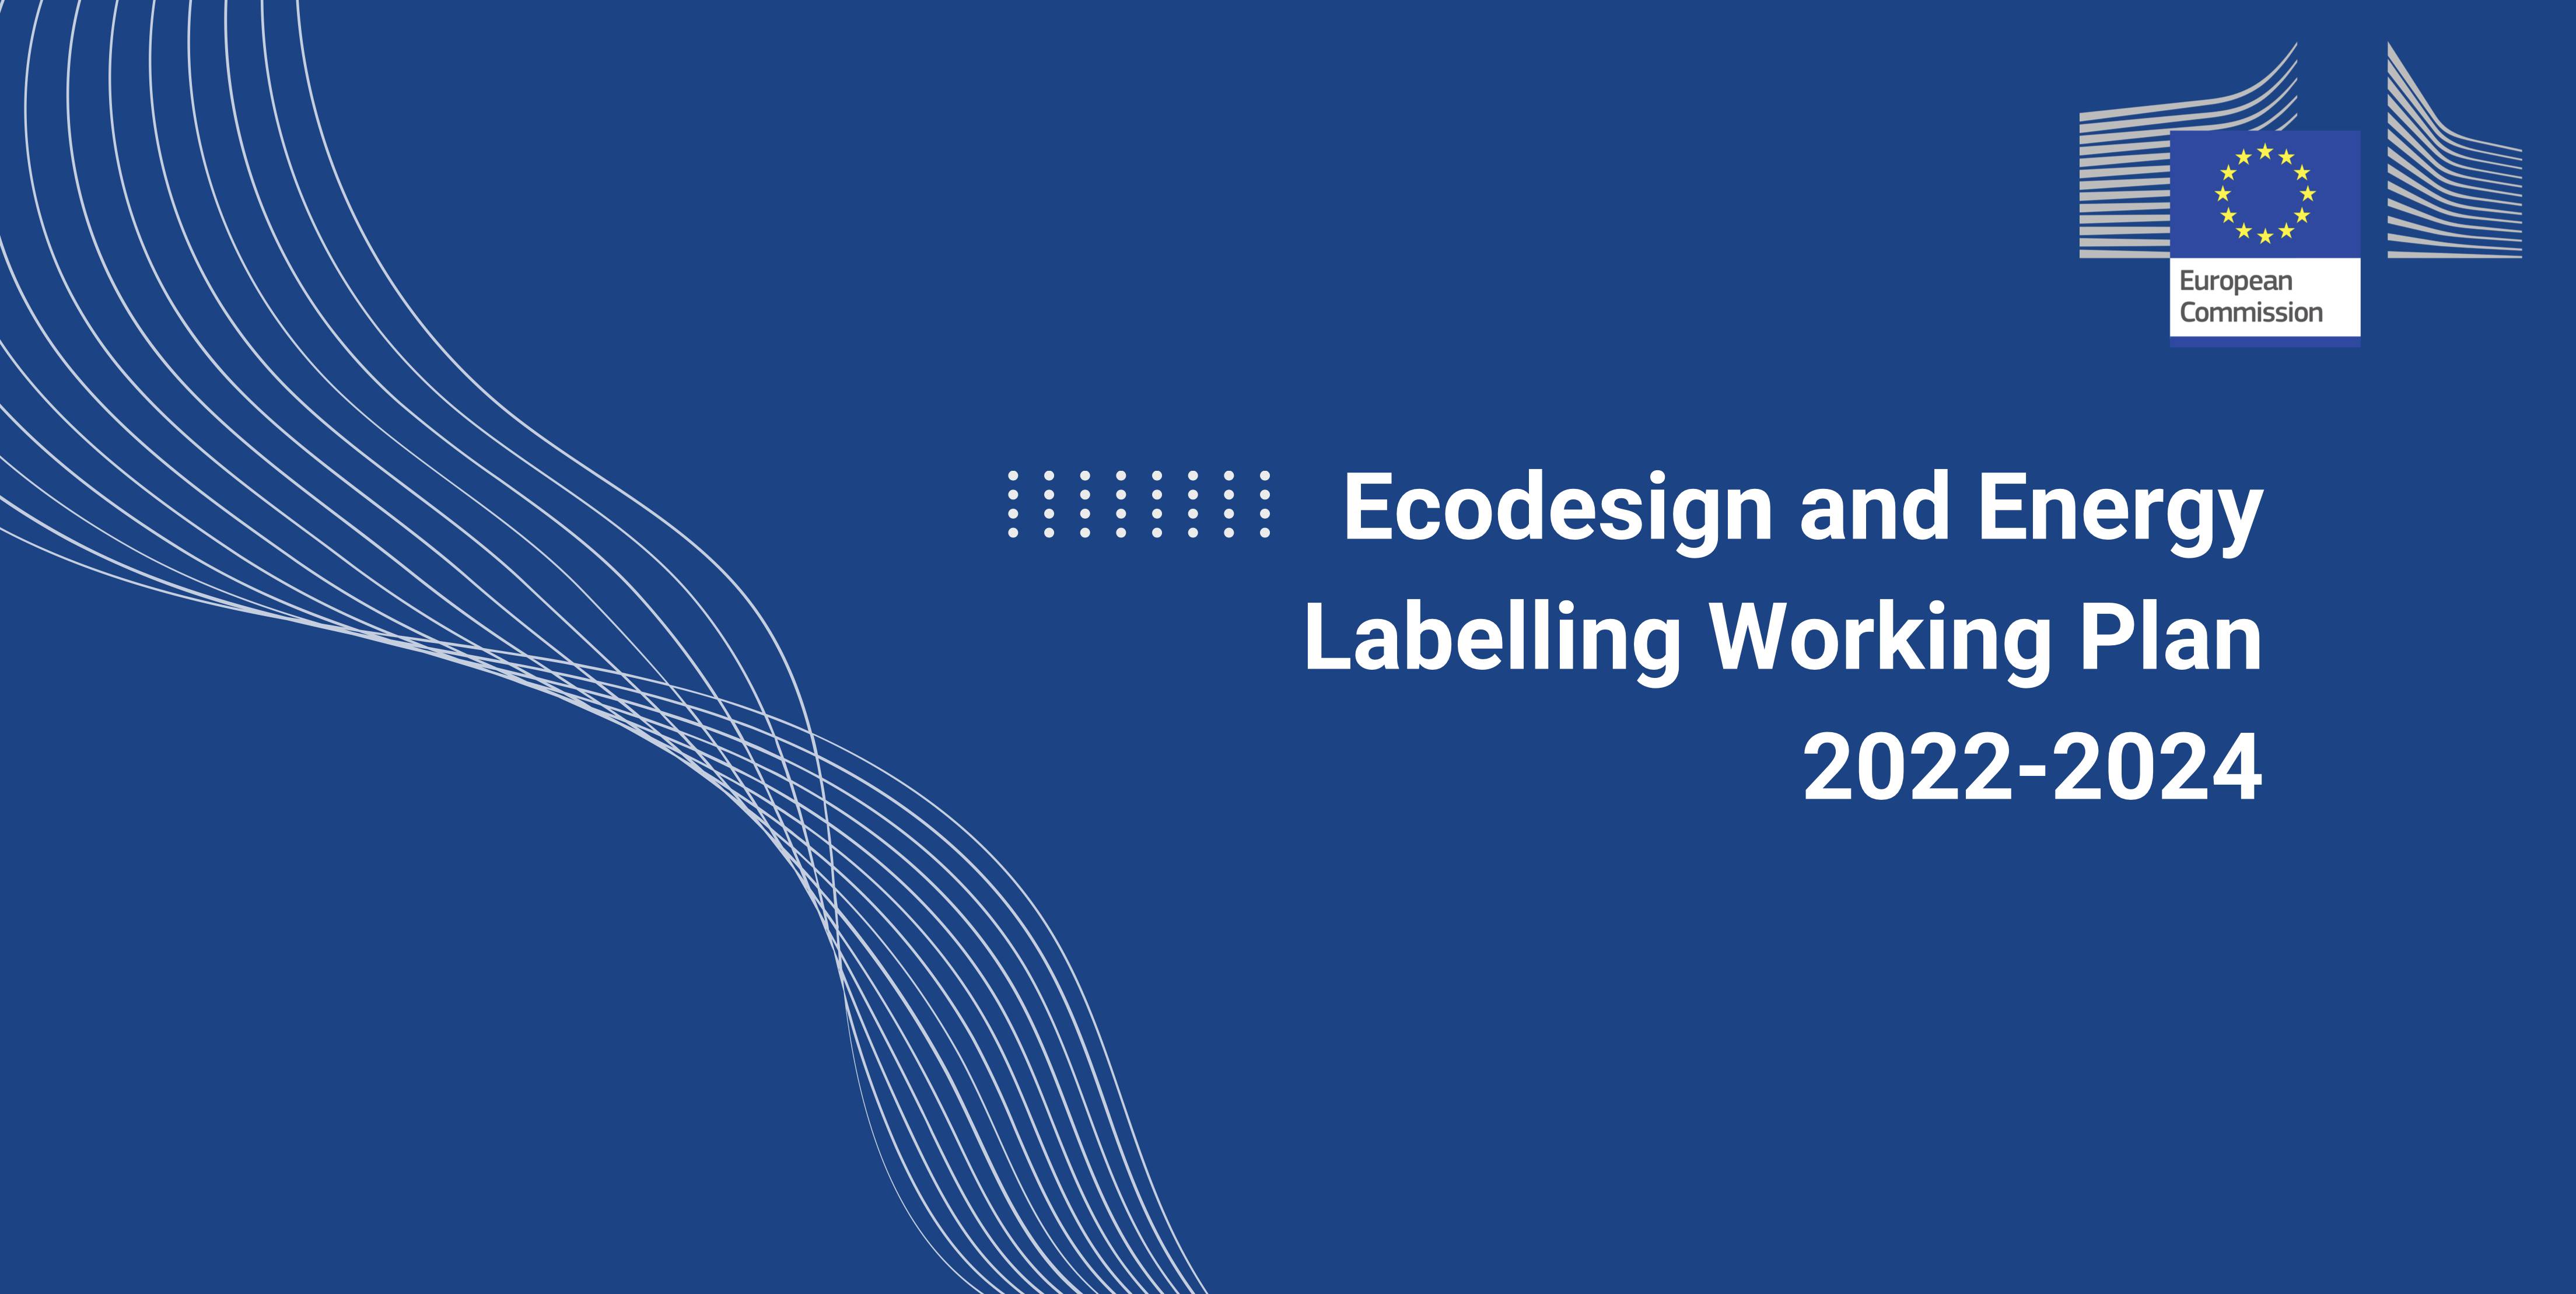 Ecodesign and Energy Labelling Working Plan 2022-2024